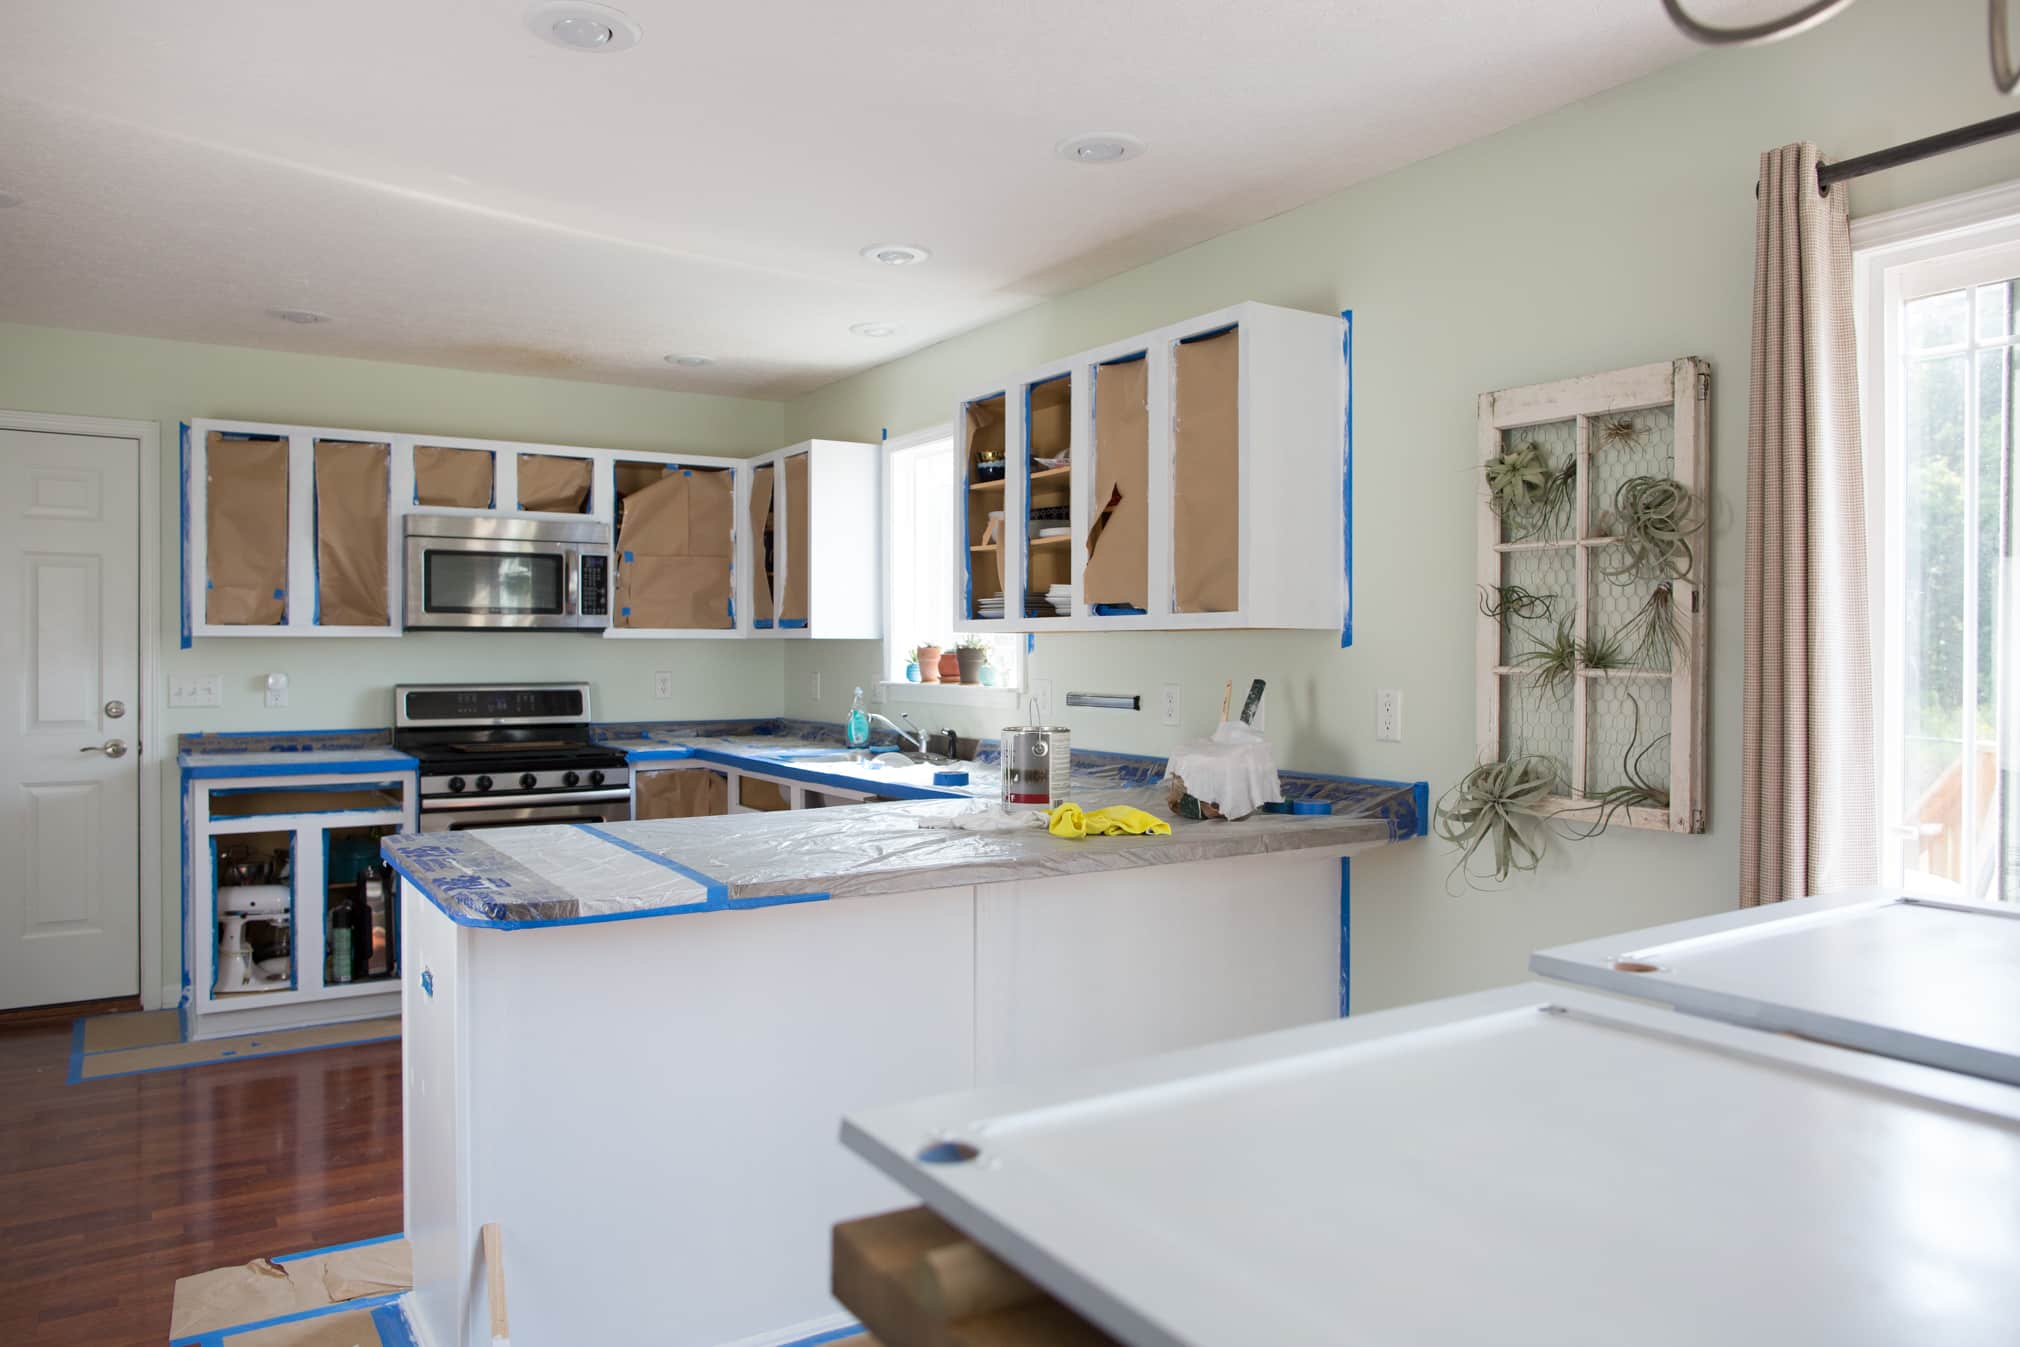 Cost To Paint Kitchen Cabinets Professionally - Image to u